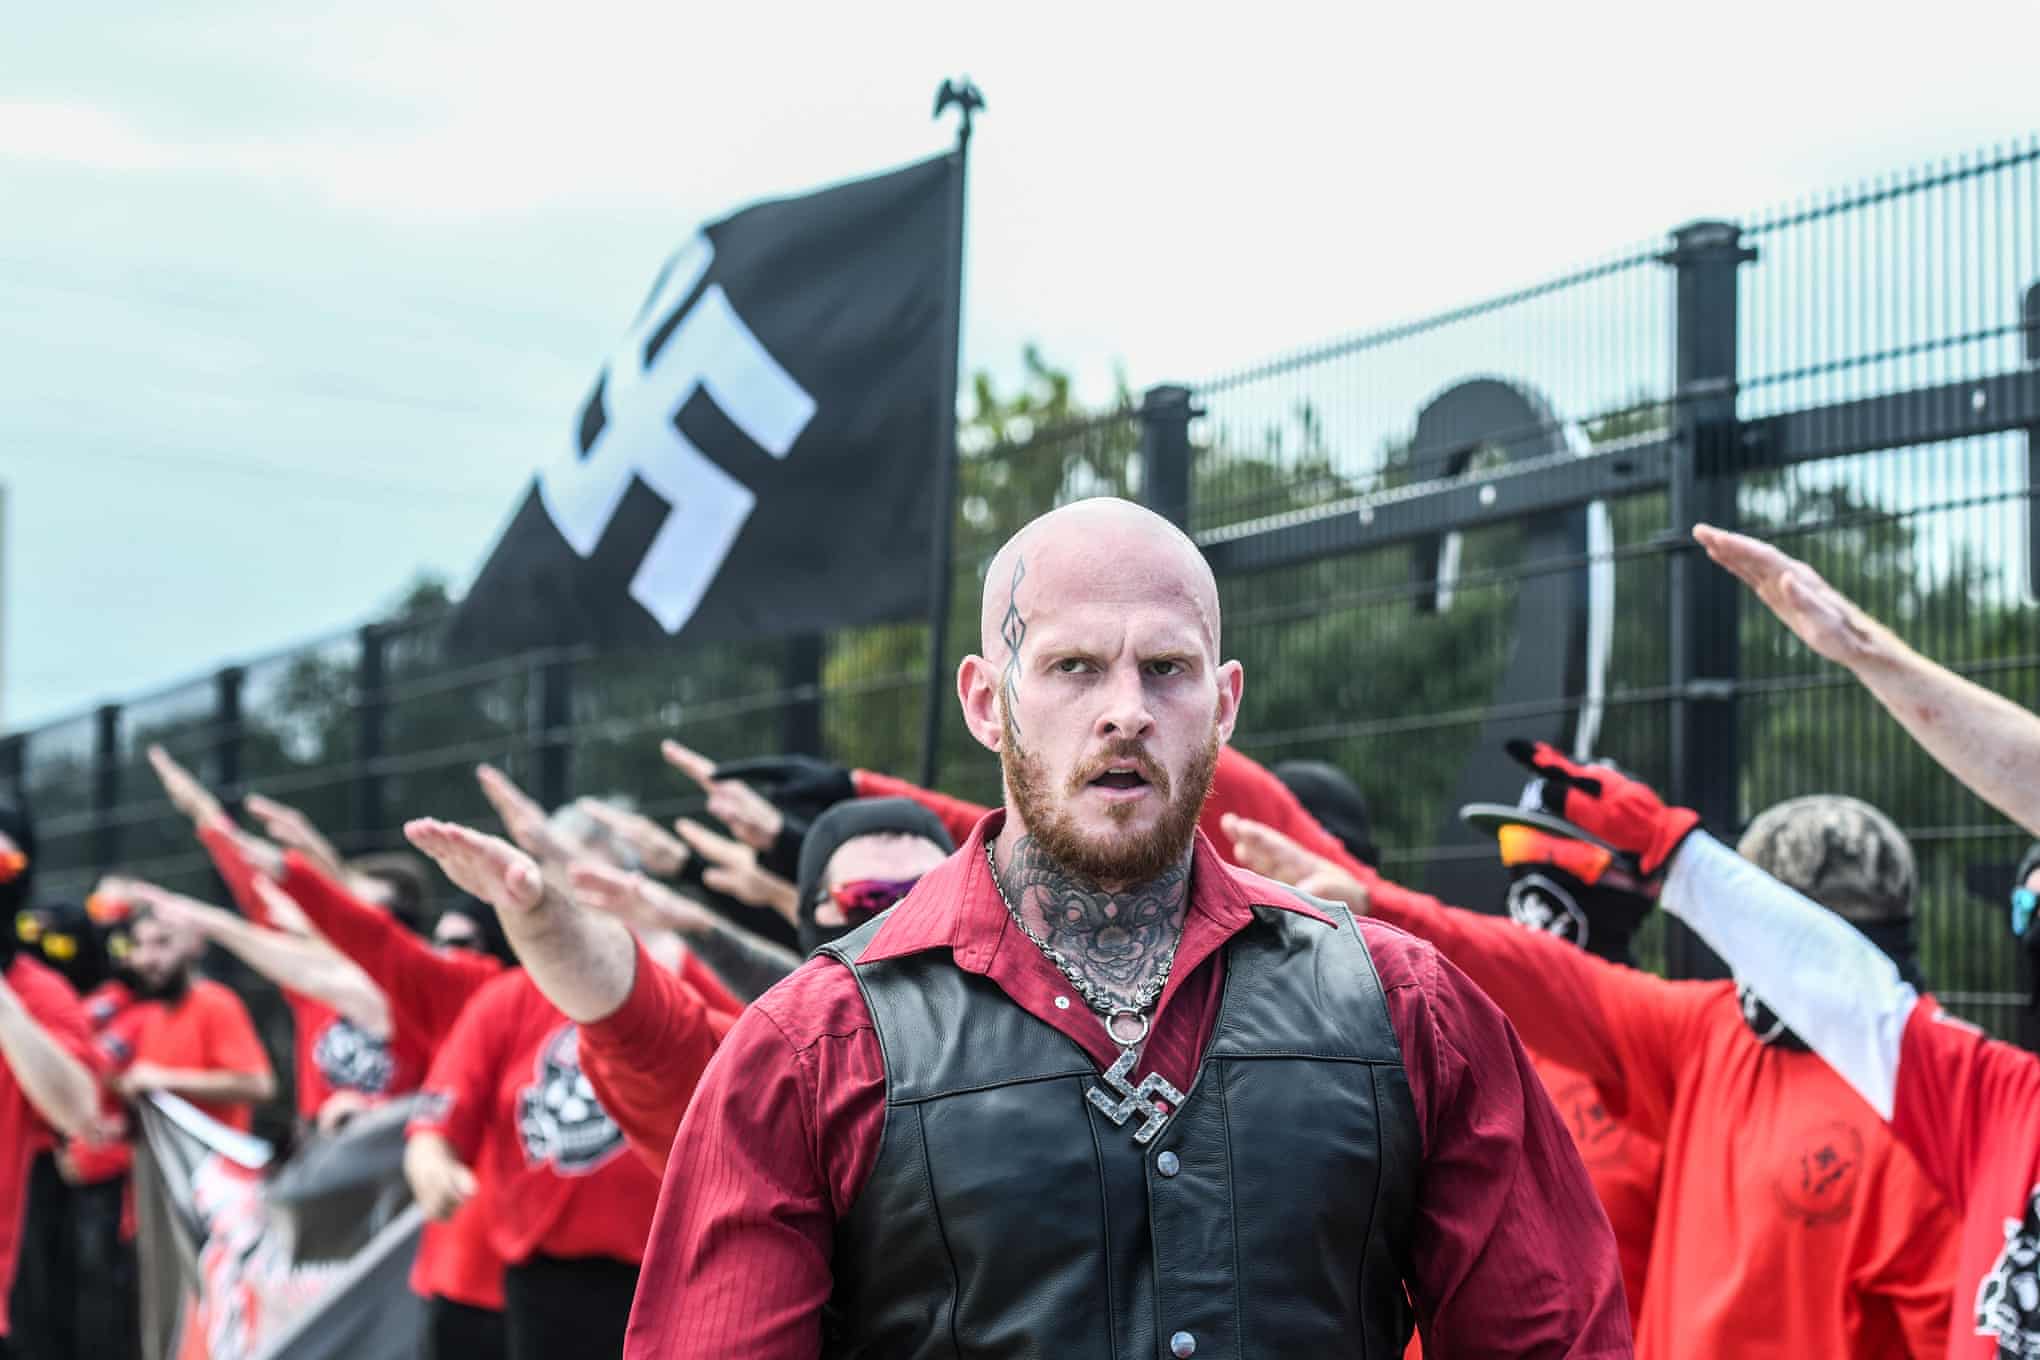 Neo-Nazis in the US no longer see backing Ukraine as a worthy cause (theguardian.com)